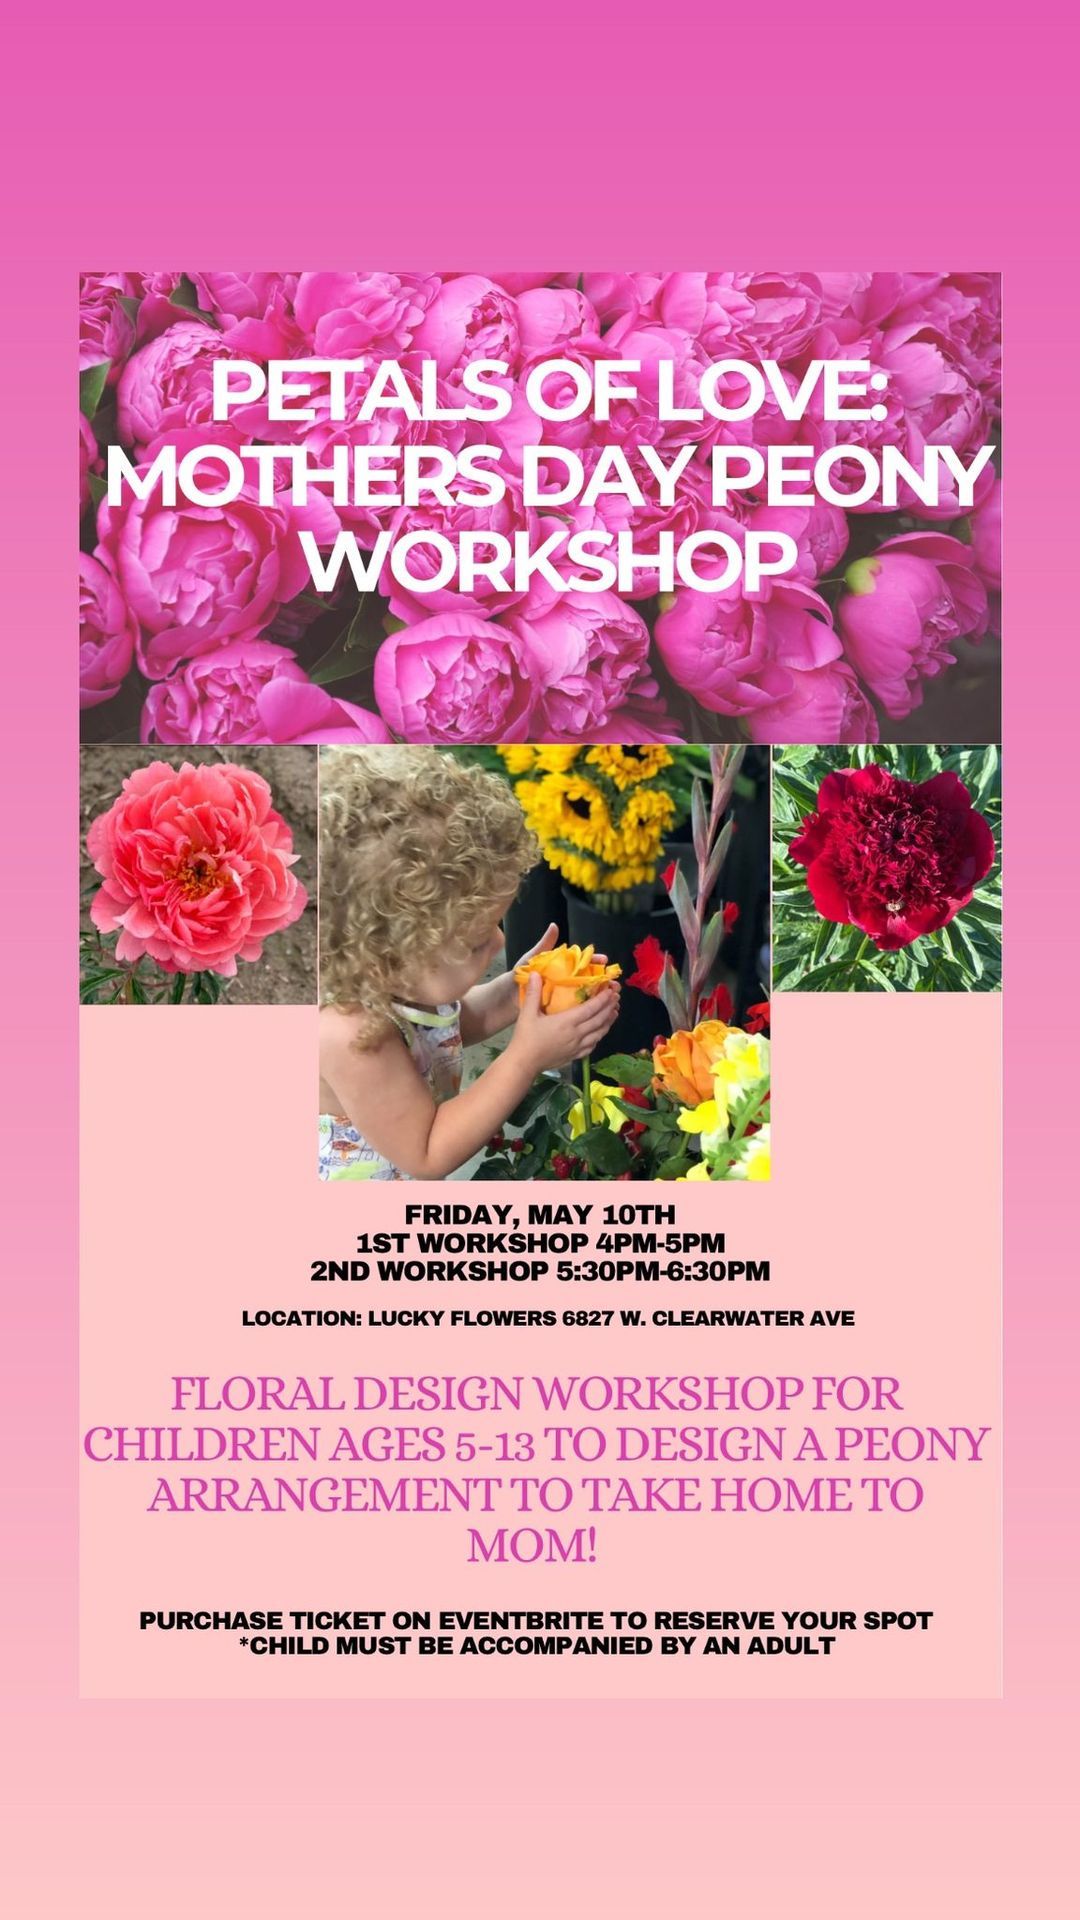 Petals of Love: Mothers Day Peony Workshop